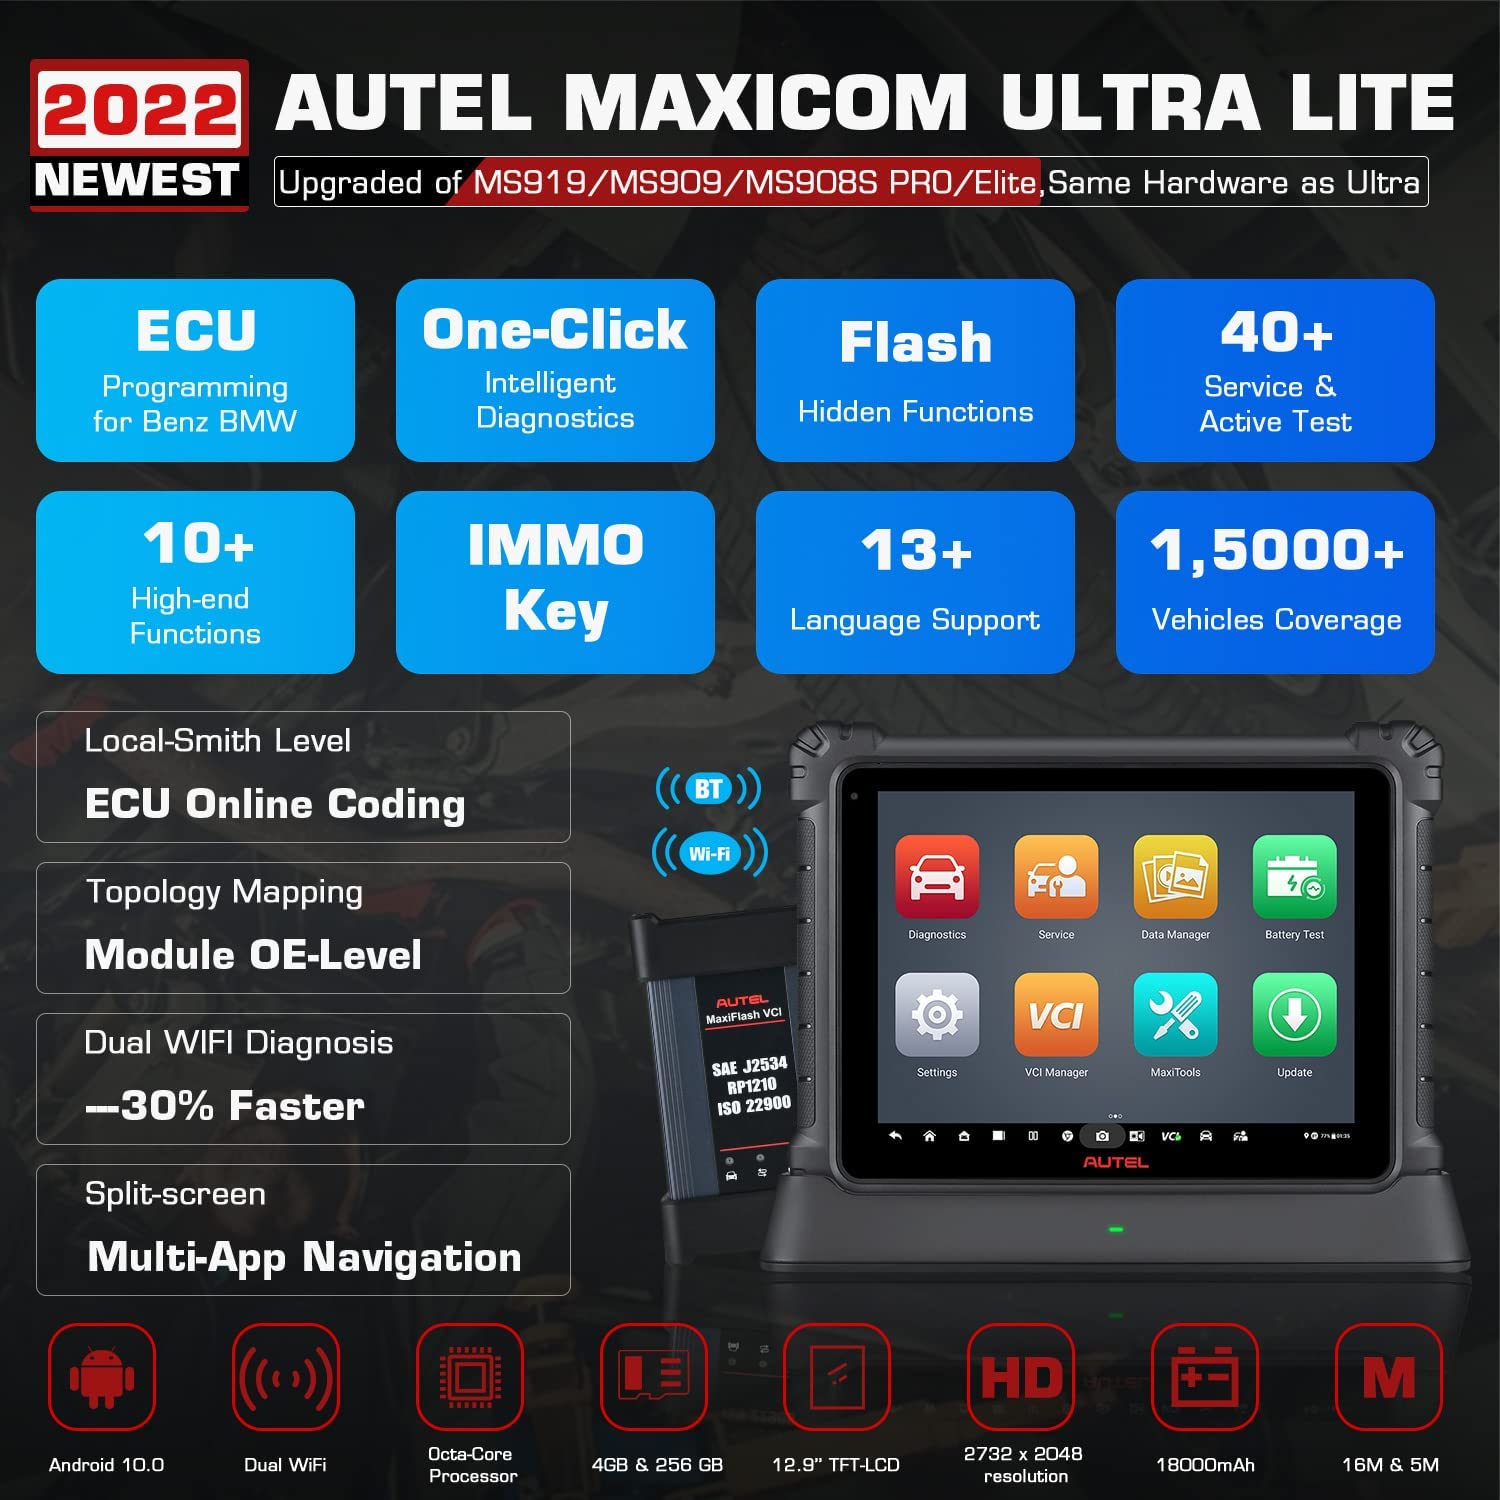 Autel Maxisys Ultra Lite 2022 upgraded of MS919/MS909/MS908S Pro